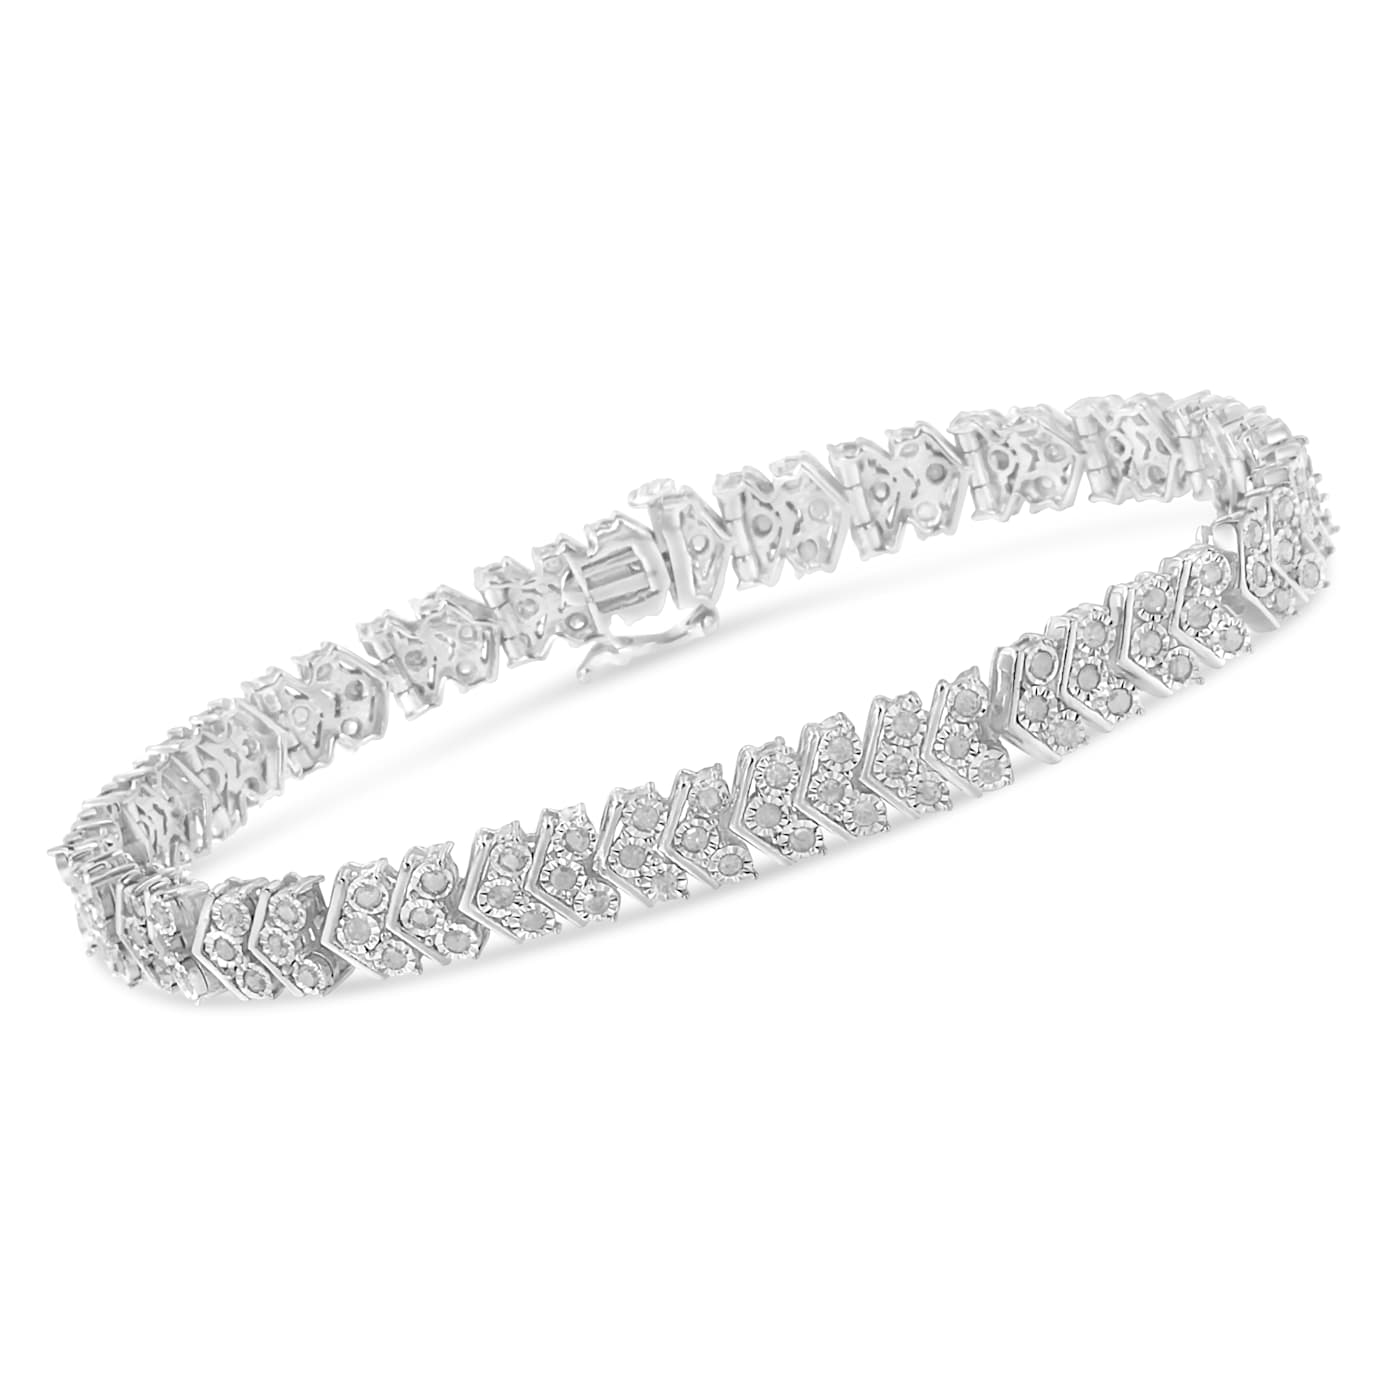 1ct Lab Diamond Tennis Bracelet Rub Over Style in 925 Sterling Silver